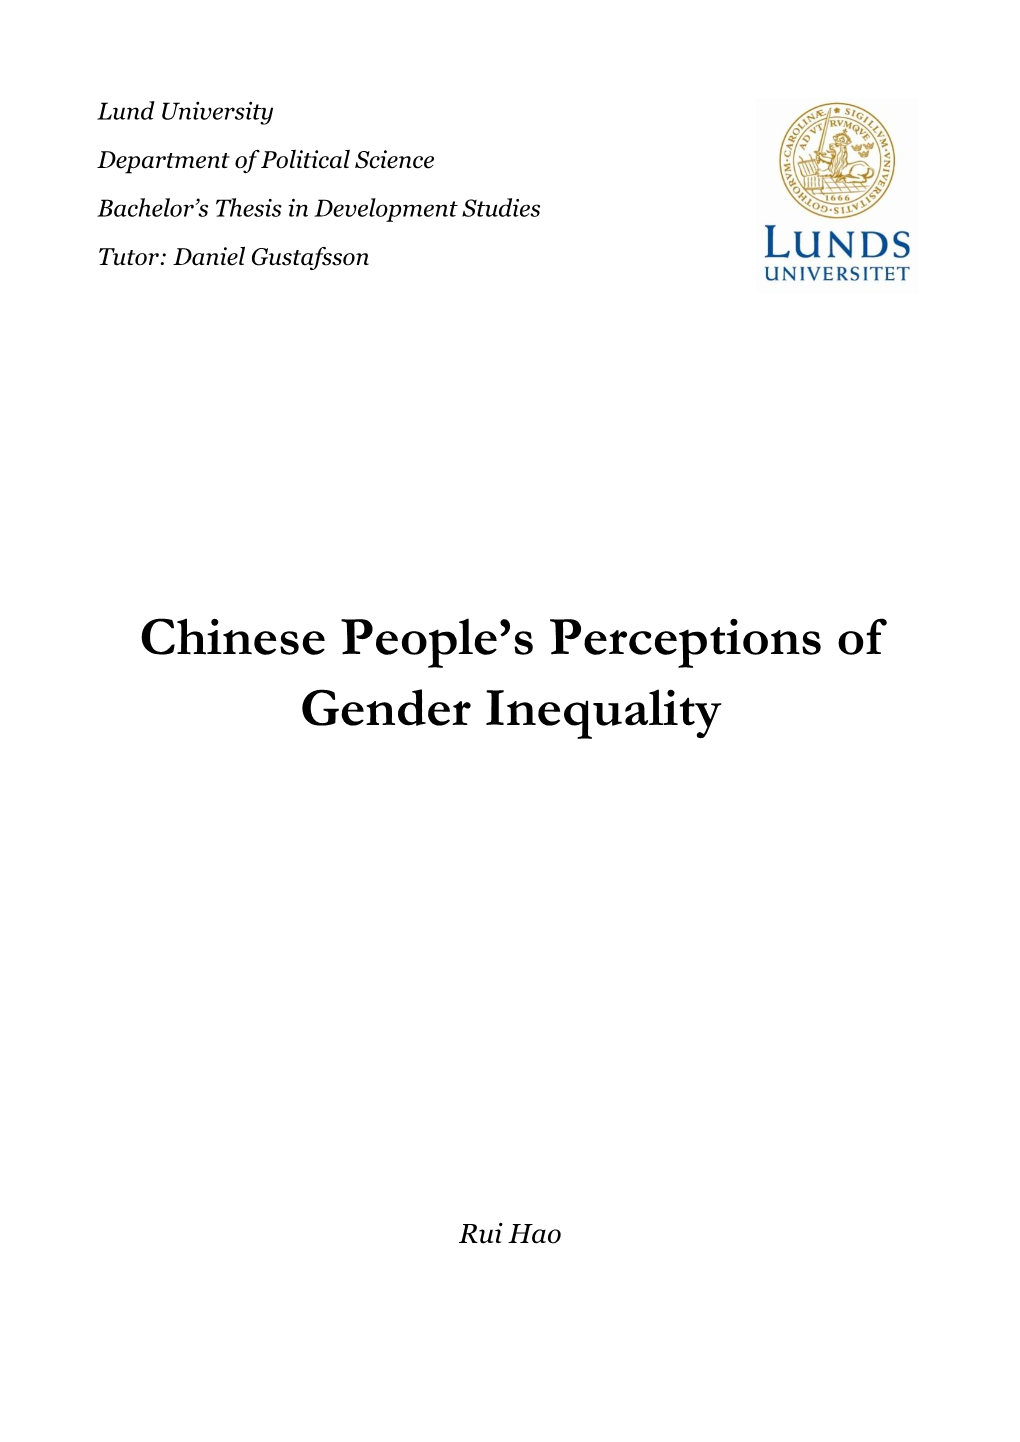 Chinese People's Perceptions of Gender Inequality